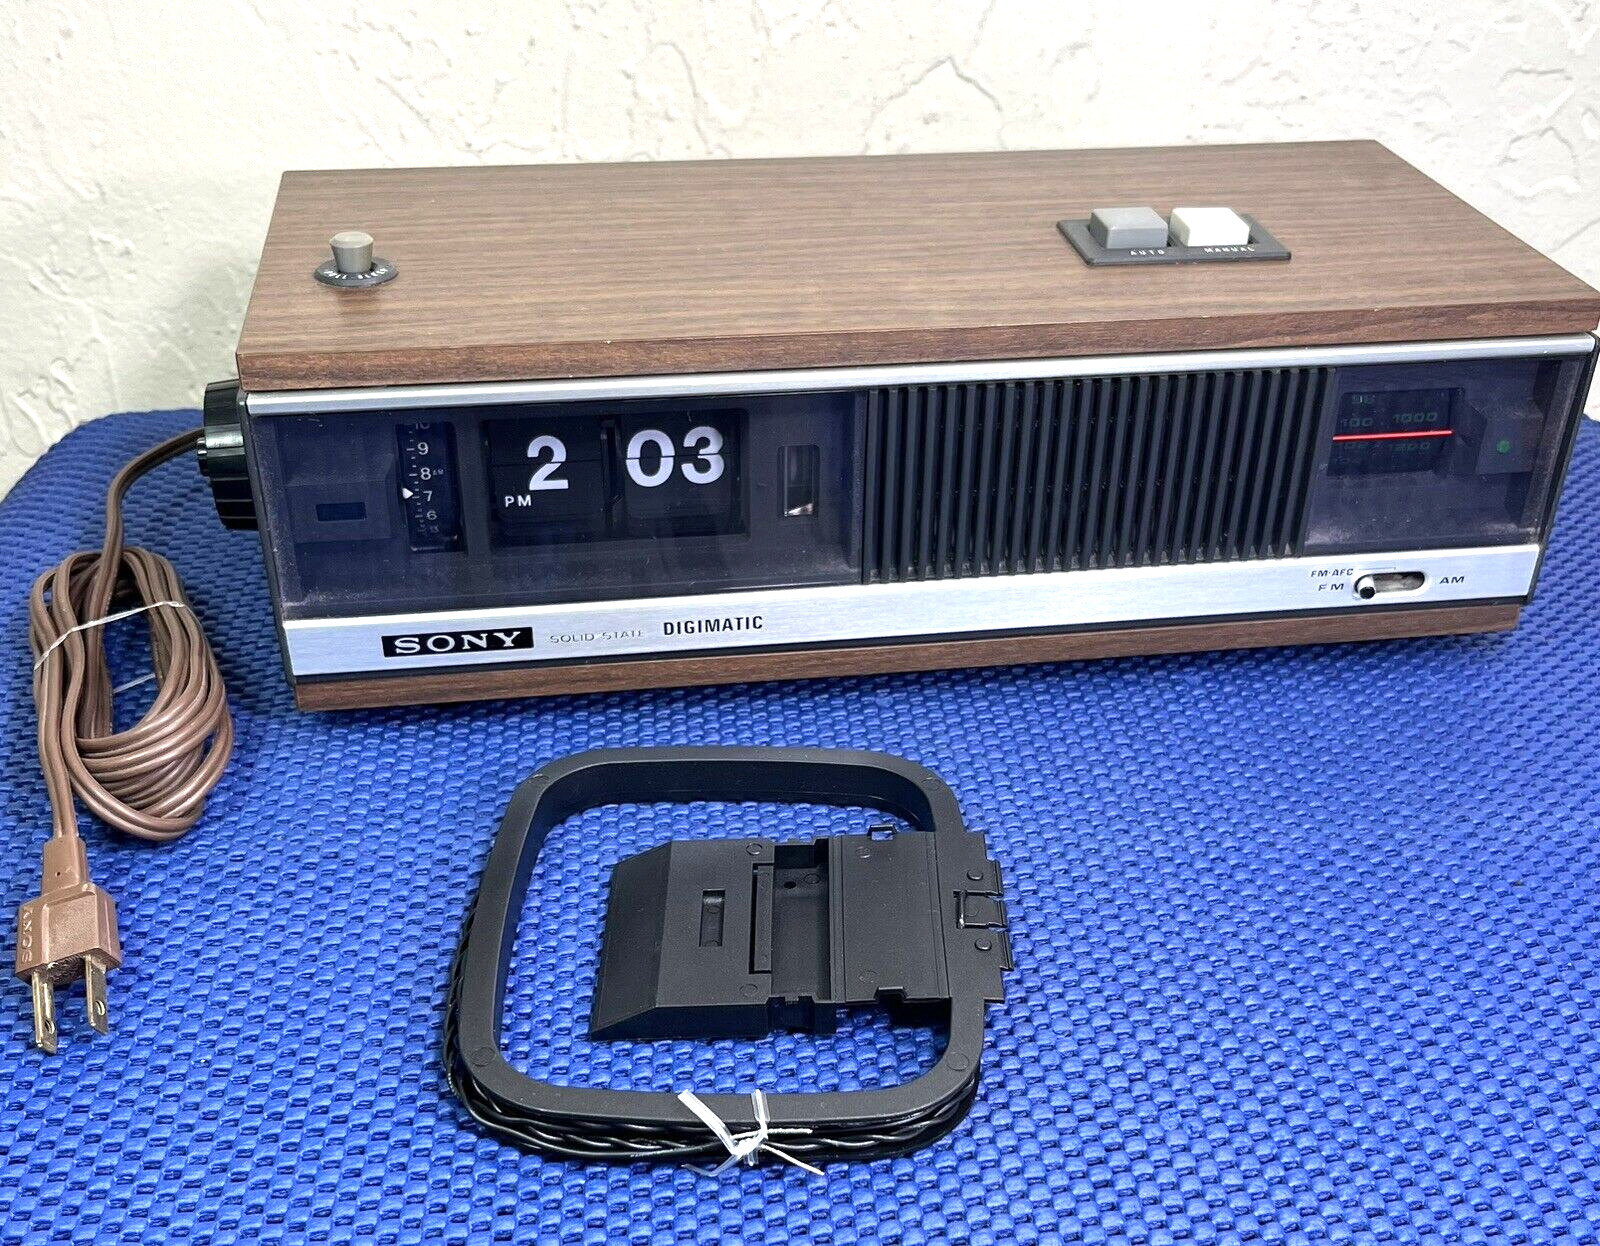 Vintage Sony Digimatic 8FC-79W Solid State Flip Clock Radio TESTED Works great